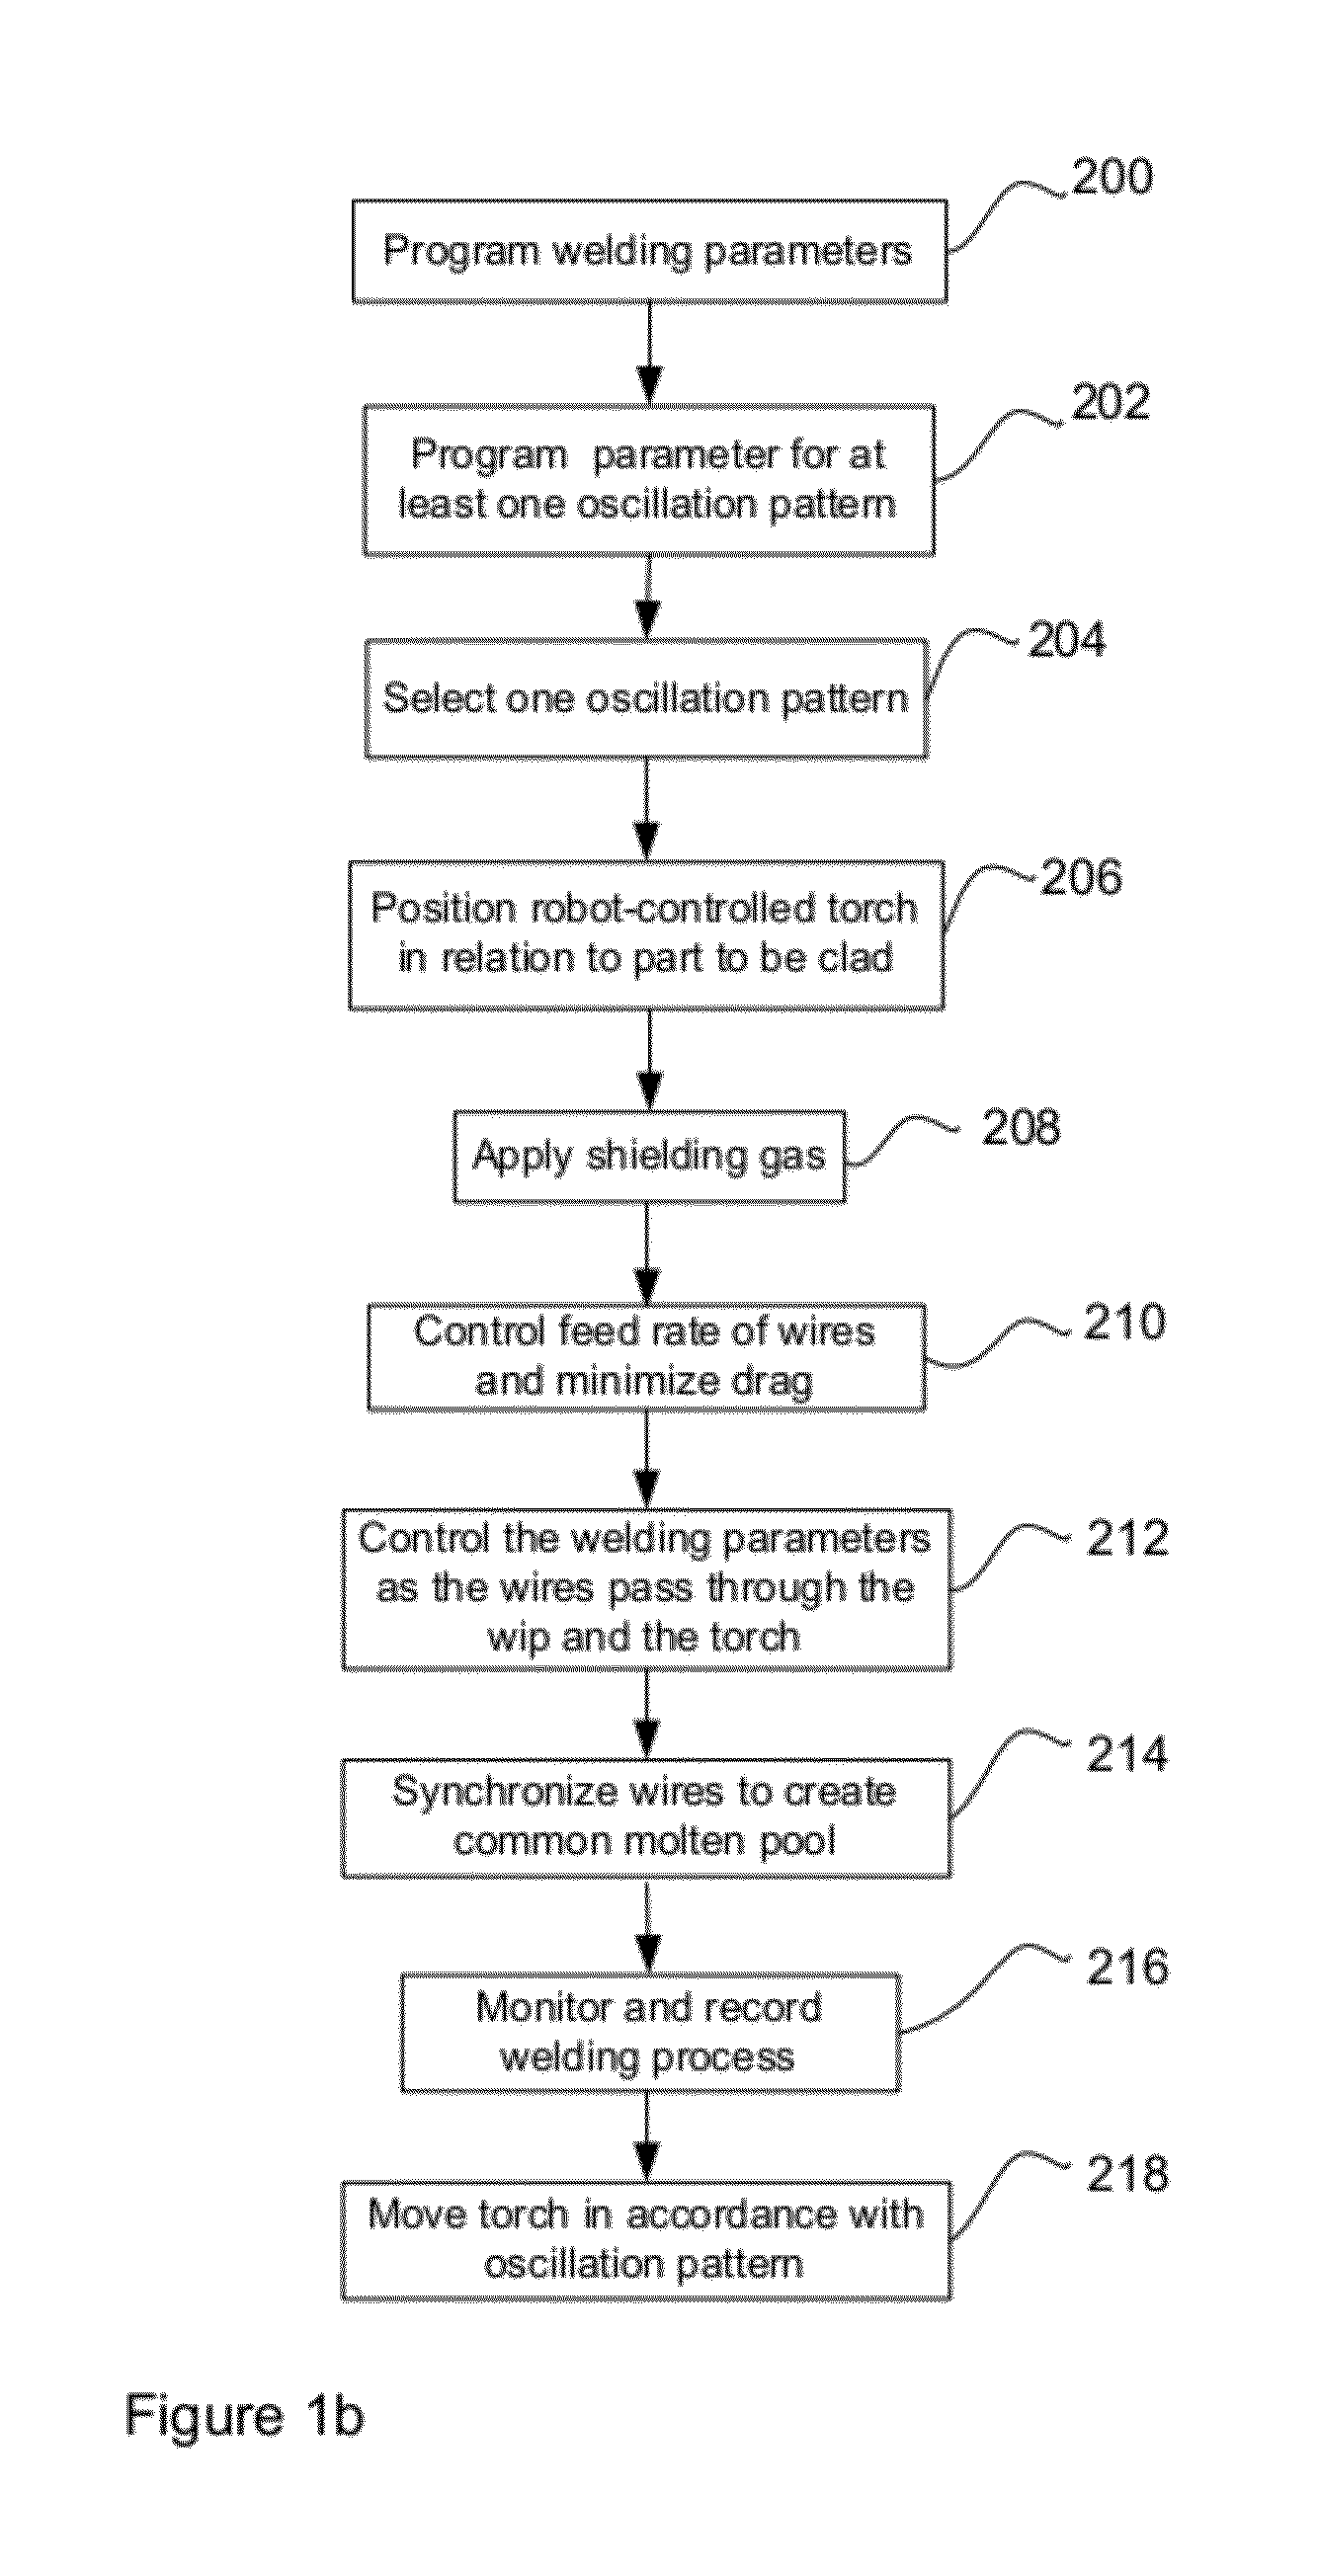 System and Method for High-Speed Robotic Cladding of Metals